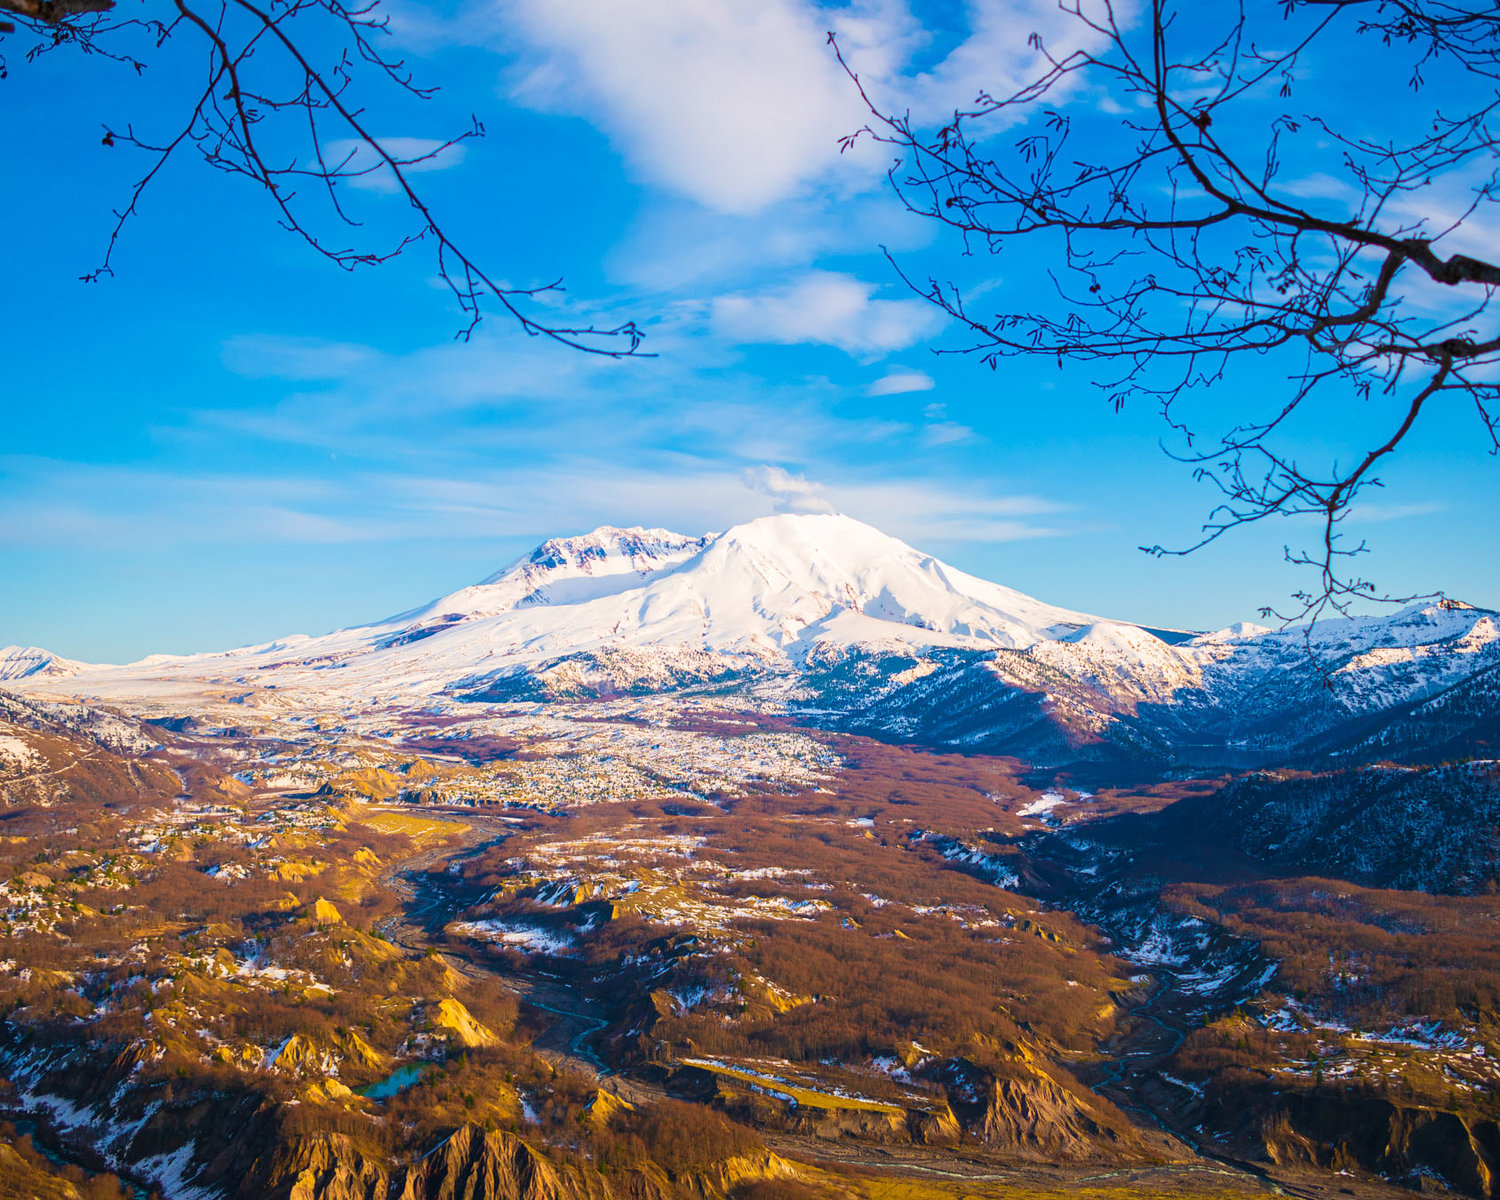 Mount St. Helens is pictured in this photograph taken by Castle Rock resident Jeran Keogh earlier this year.